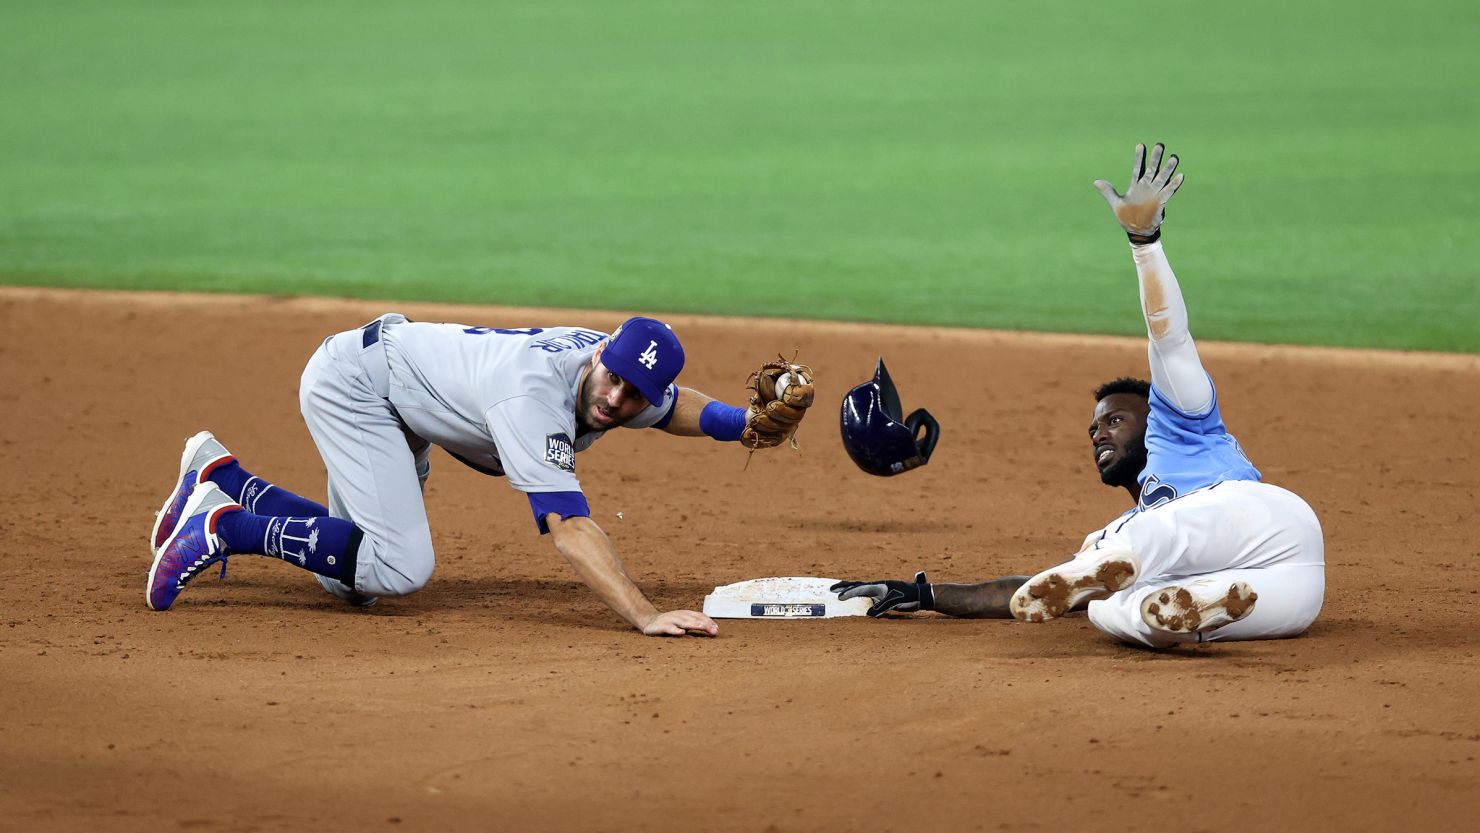 Chris Taylor of the Los Angeles Dodgers tags out Randy Arozarena of the Tampa Bay Rays during an attempt to steal second base in the third inning in Game 5 of the World Series at Globe Life Field.